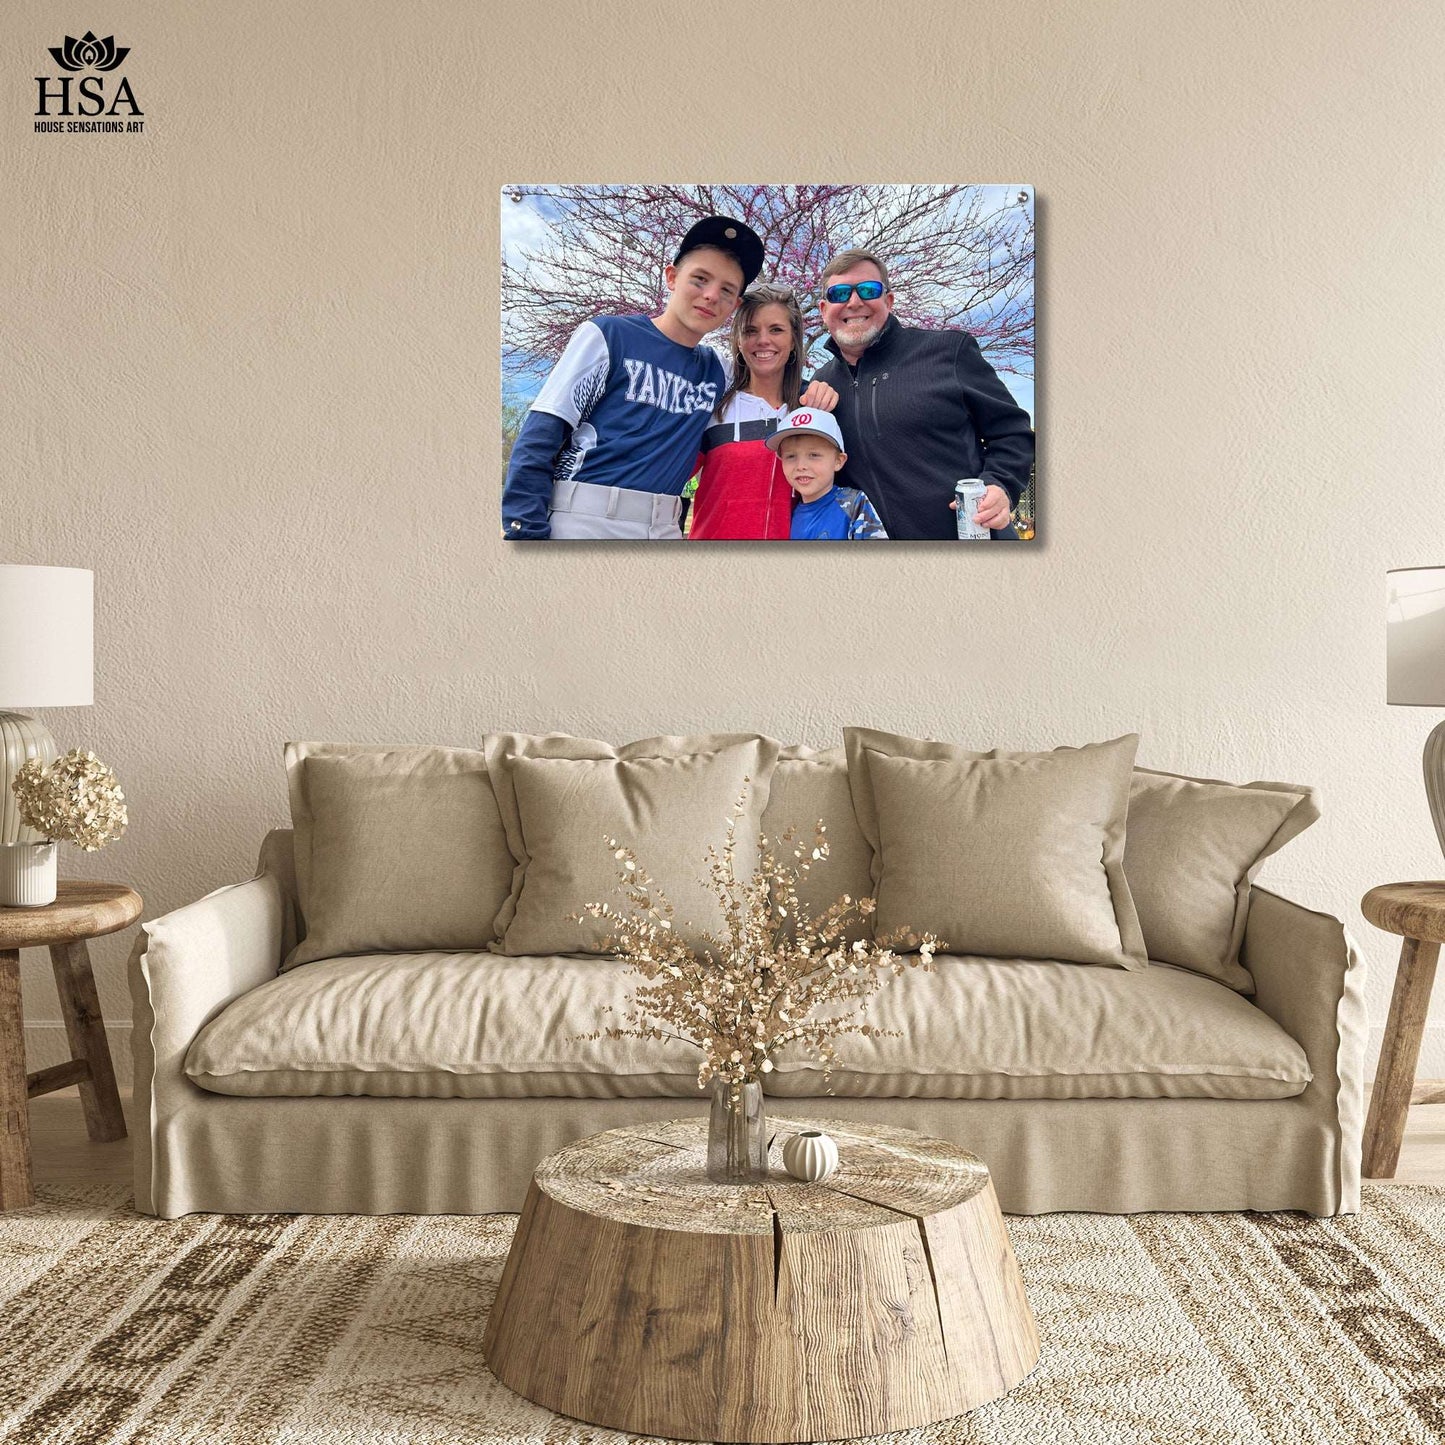 Metal Photo Print- upload your photo to make a unique and personalized Gift for Any Occasion.  House Sensations Art   